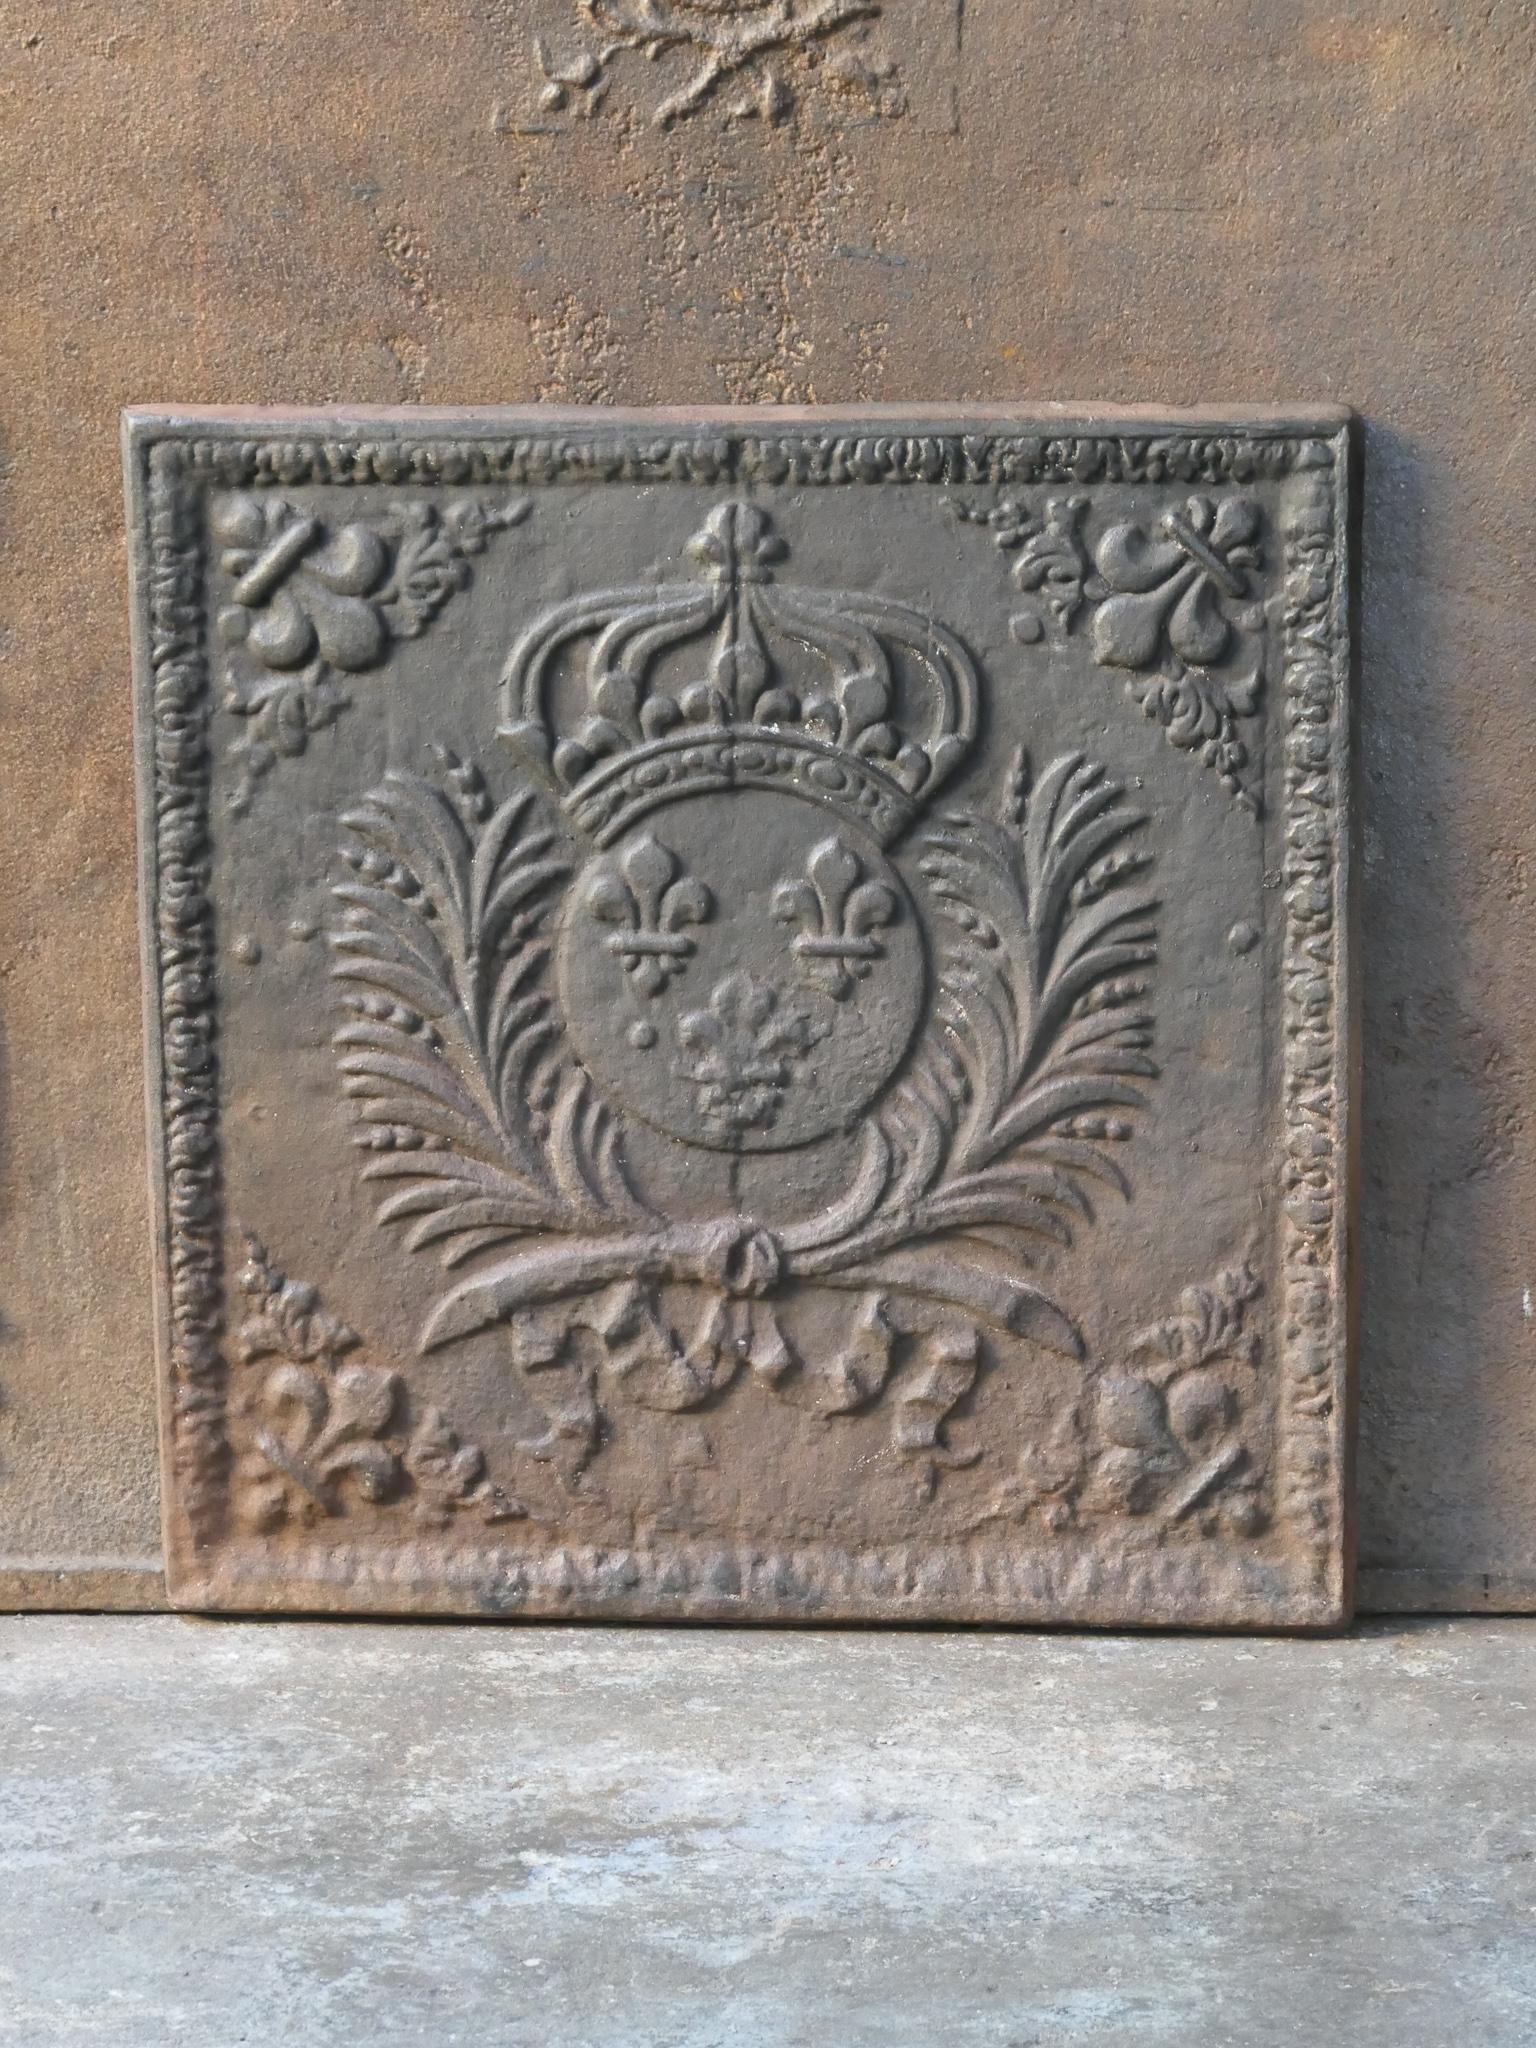 20th century French Louis XIV style fireback with the arms of France. Coat of arms of the House of Bourbon, an originally French royal house that became a major dynasty in Europe. It delivered kings for Spain (Navarra), France, both Sicilies and